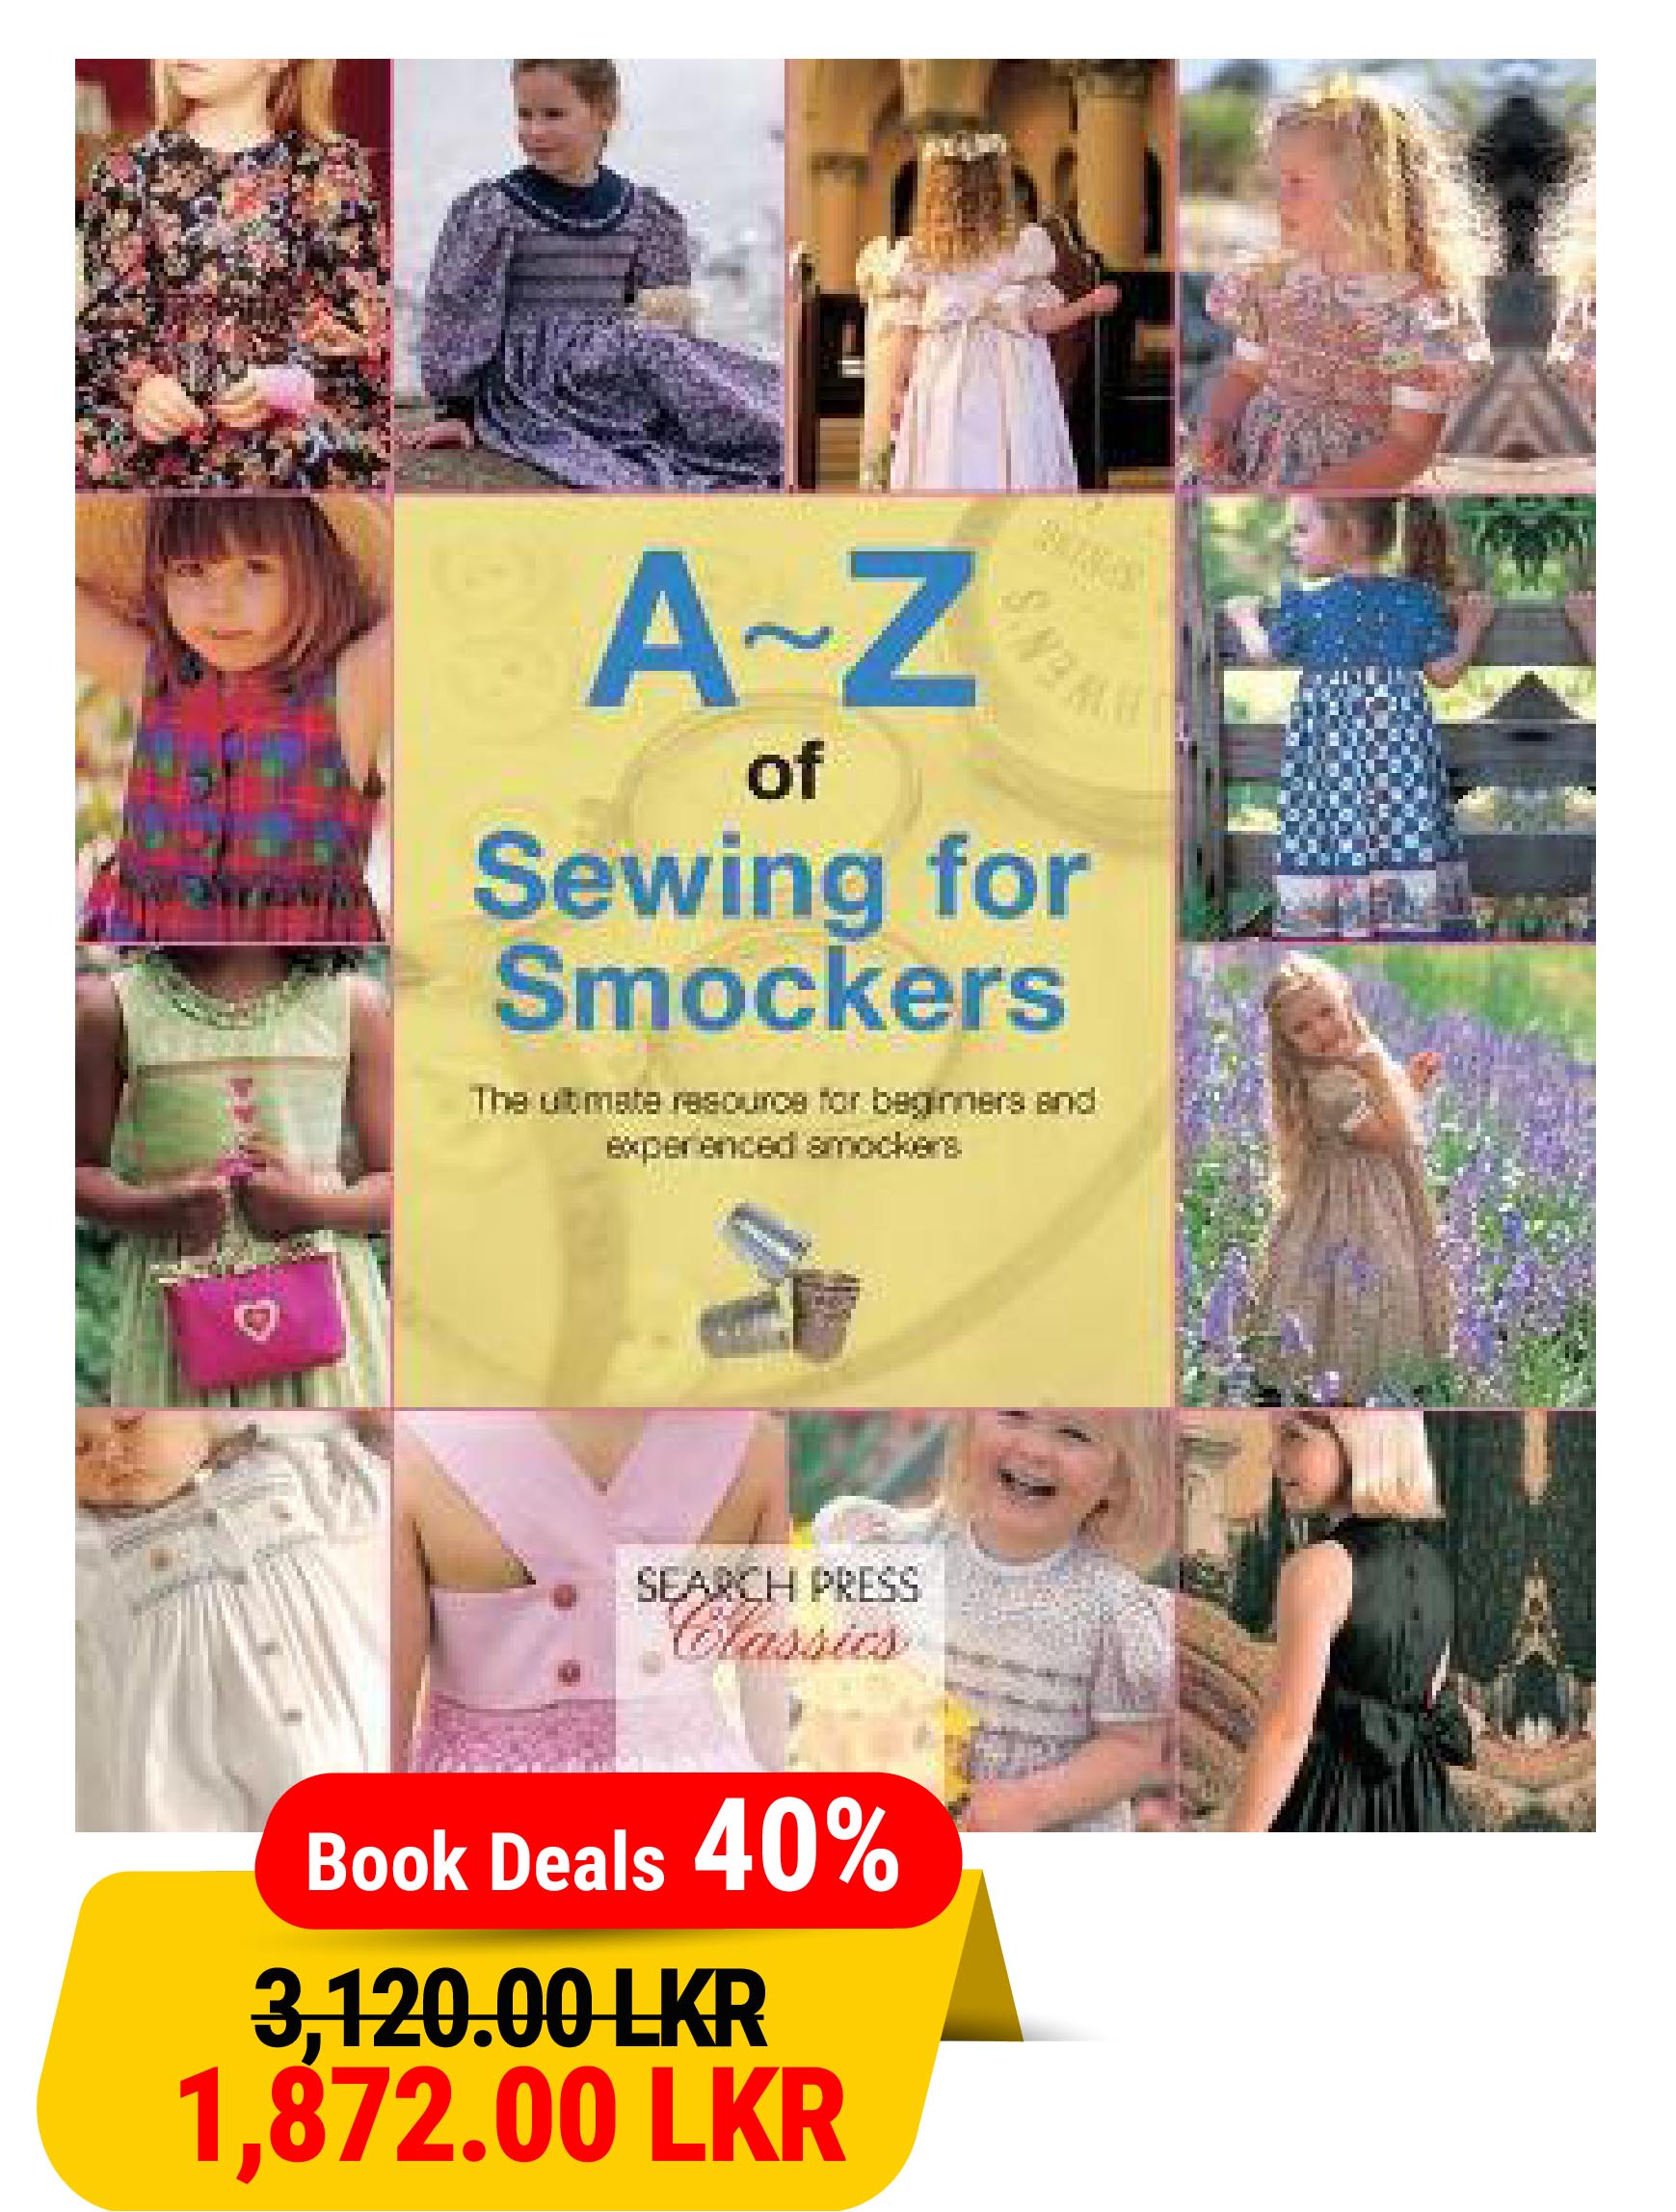 A-Z of Sewing for Smockers: The perfect resource for creating heirloom smocked garments